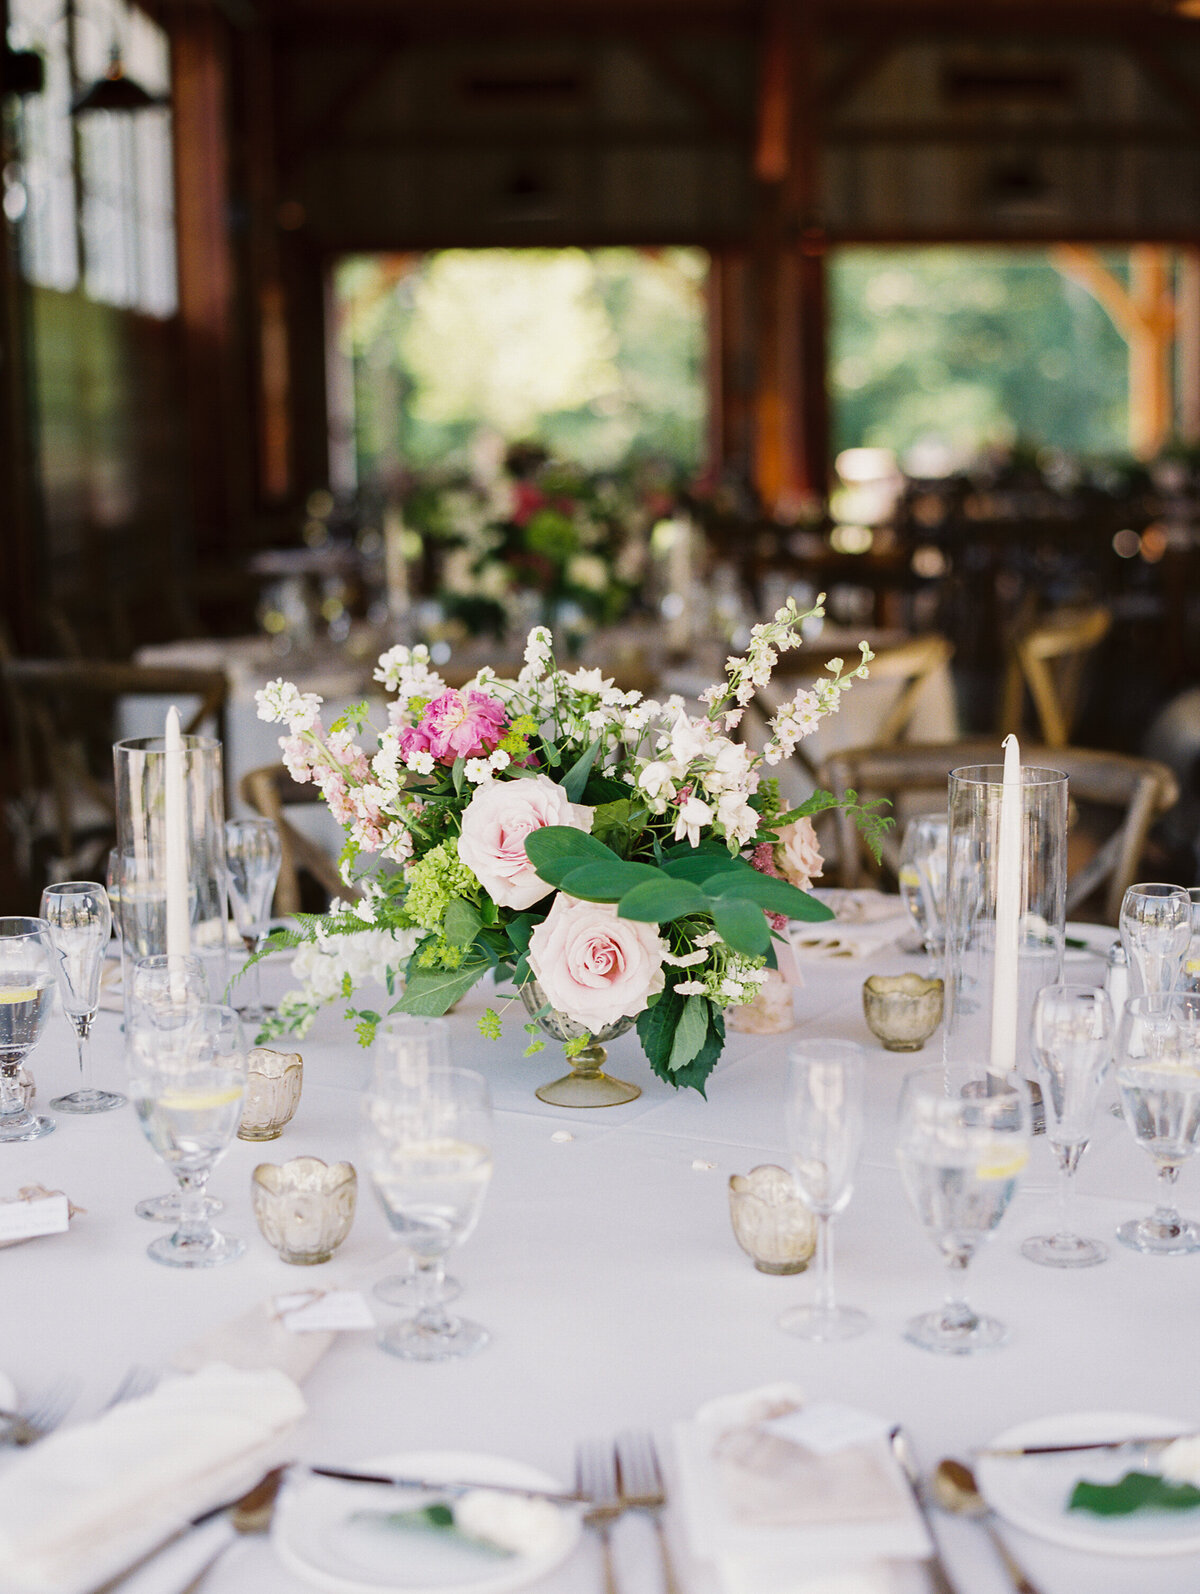 Table decorated with white tablecloth and pink and green floral centerpiece